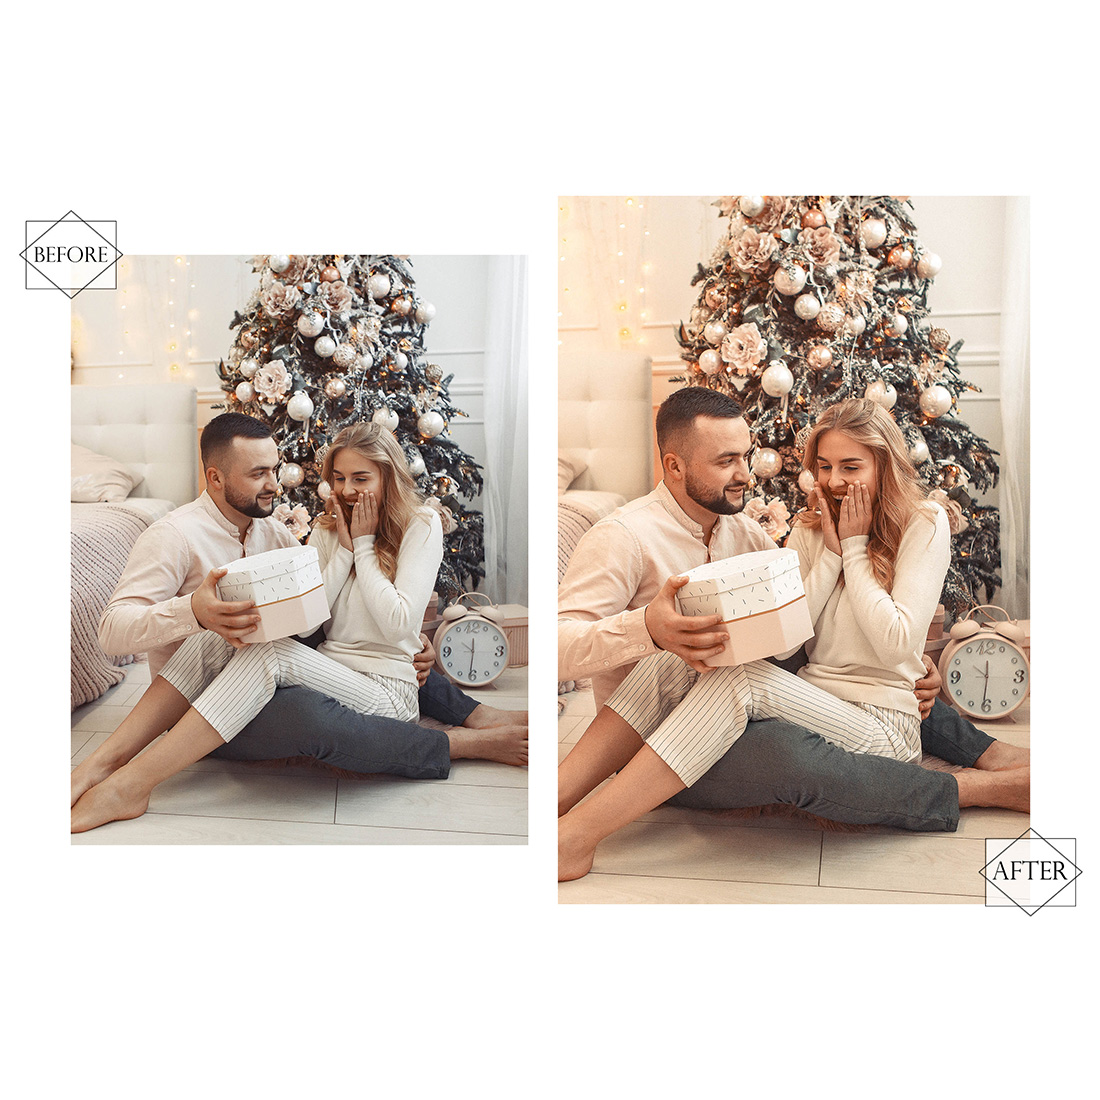 12 Photoshop Actions, Christmas Cheer Ps Action, Xmas ACR Preset, Wormy Filter, Lifestyle Theme For Instagram, Winter, Family Photos preview image.